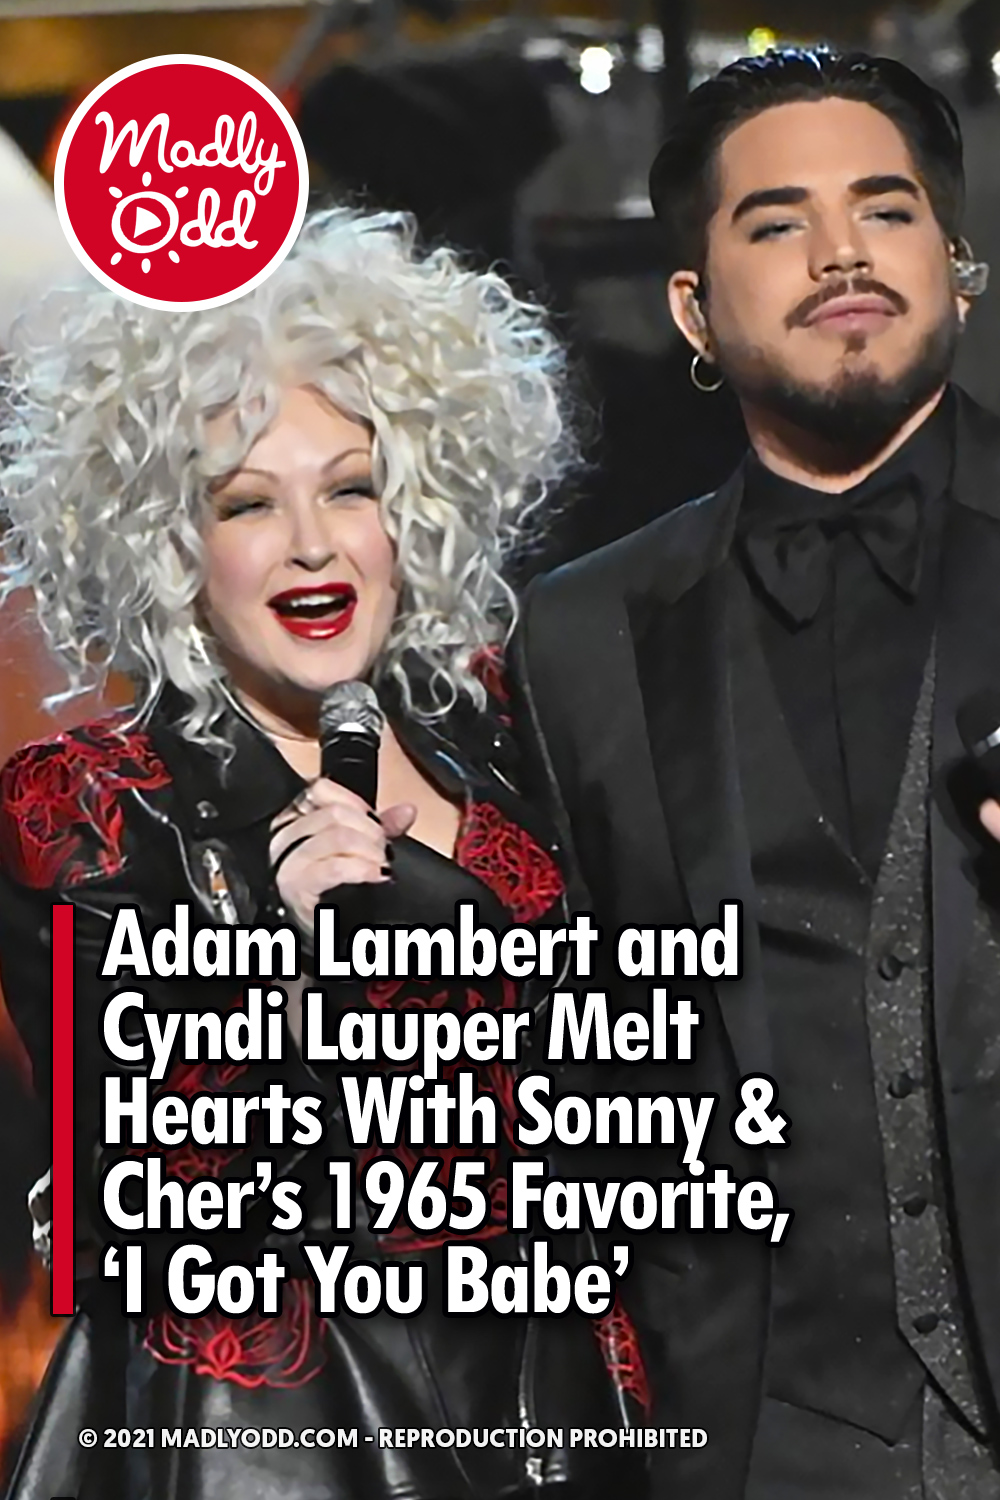 Adam Lambert and Cyndi Lauper Melt Hearts With Sonny & Cher\'s 1965 Favorite, \'I Got You Babe\'